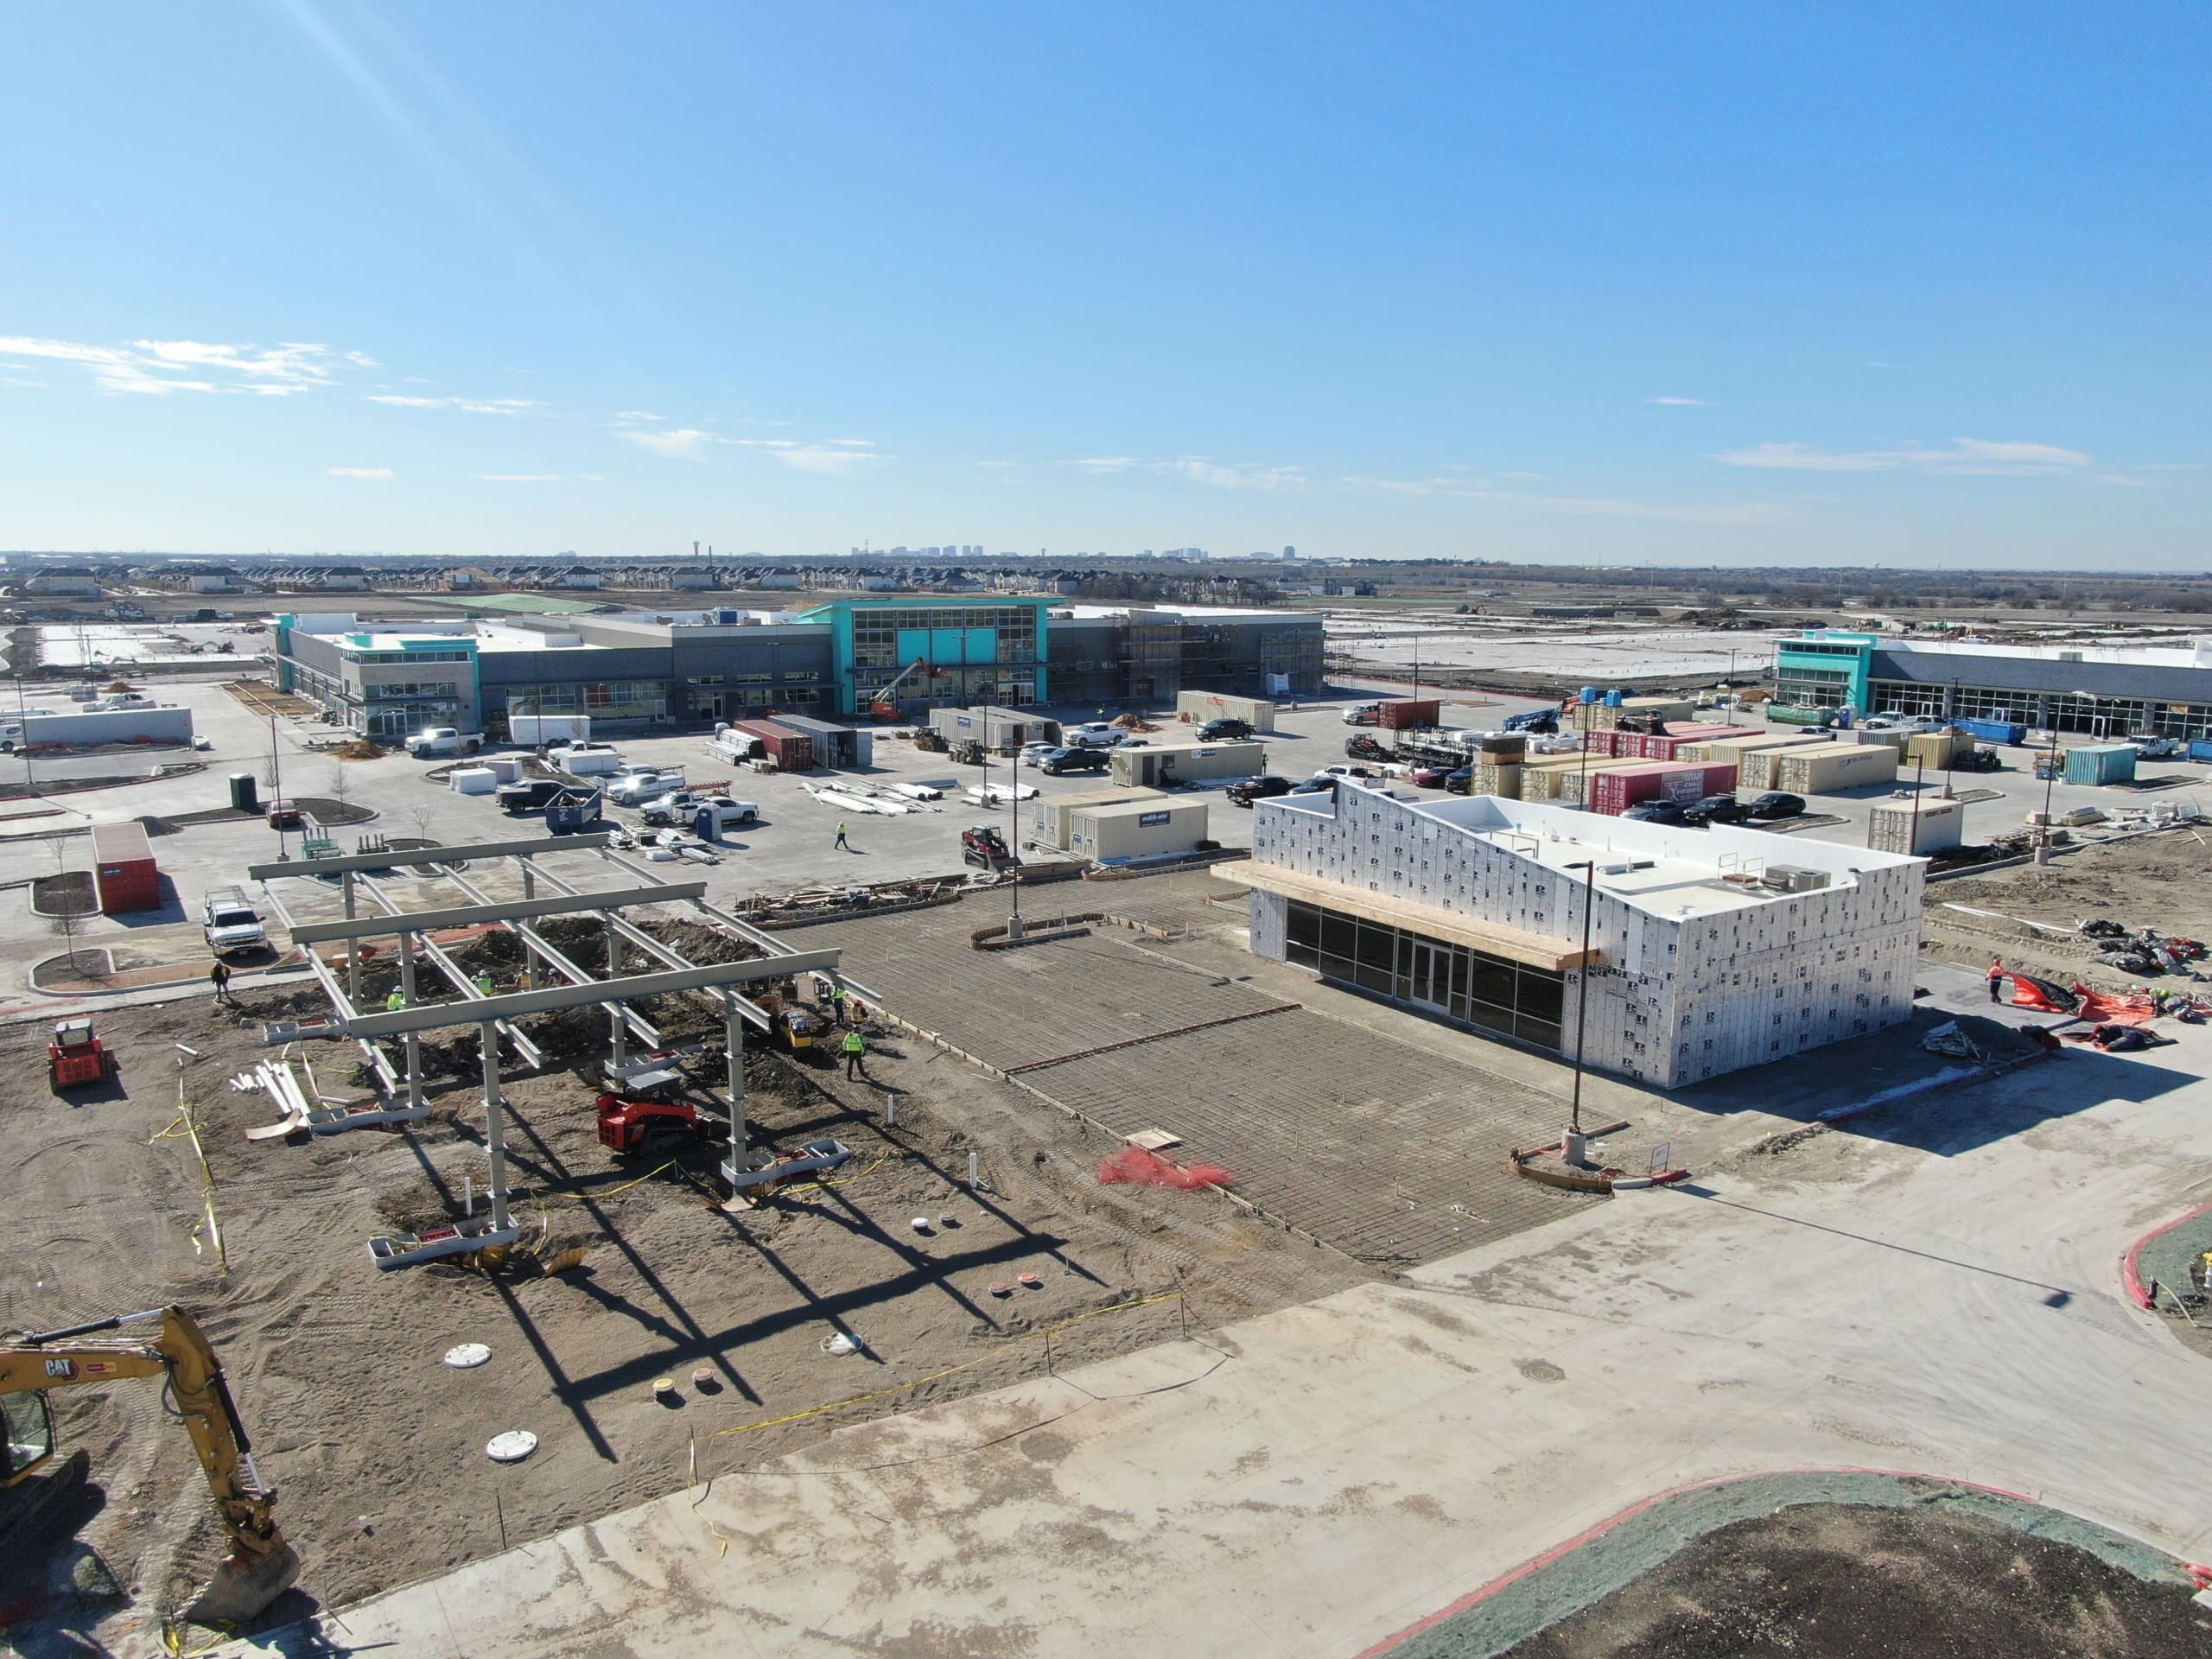 Aerial view of an industrial construction site with buildings under development and construction vehicles.